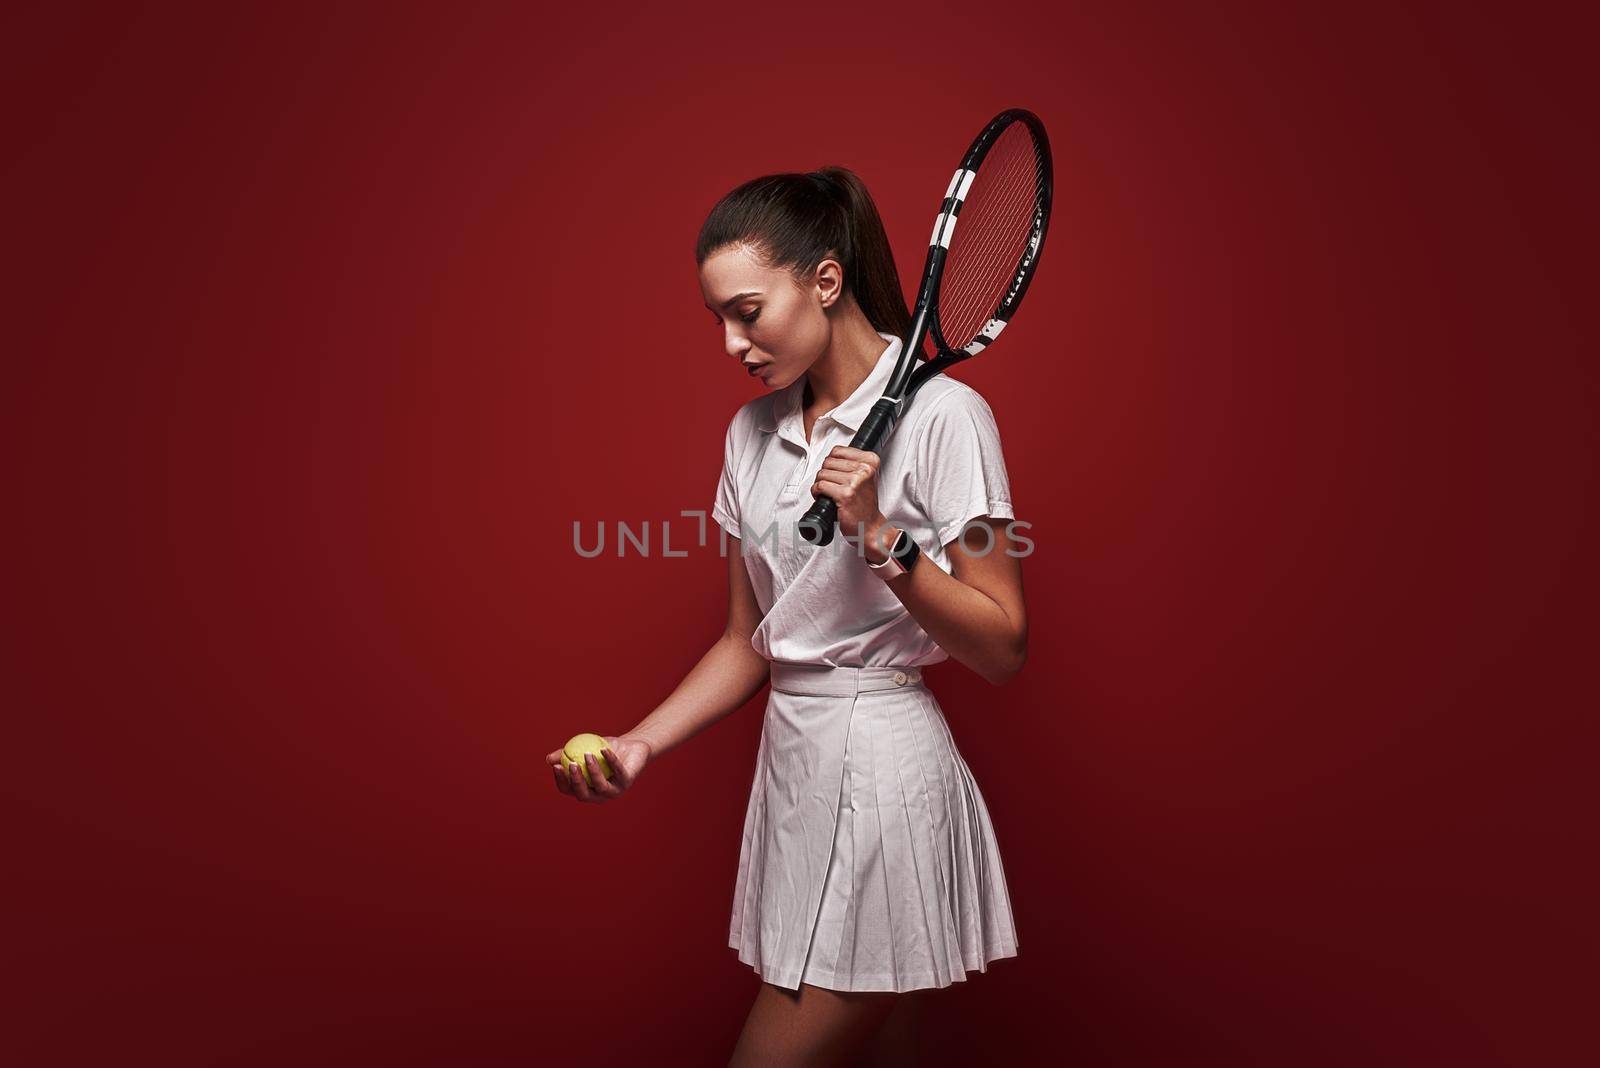 Young tennis player in white polo shirt and skirt standing isolated over red background with a racket and a ball